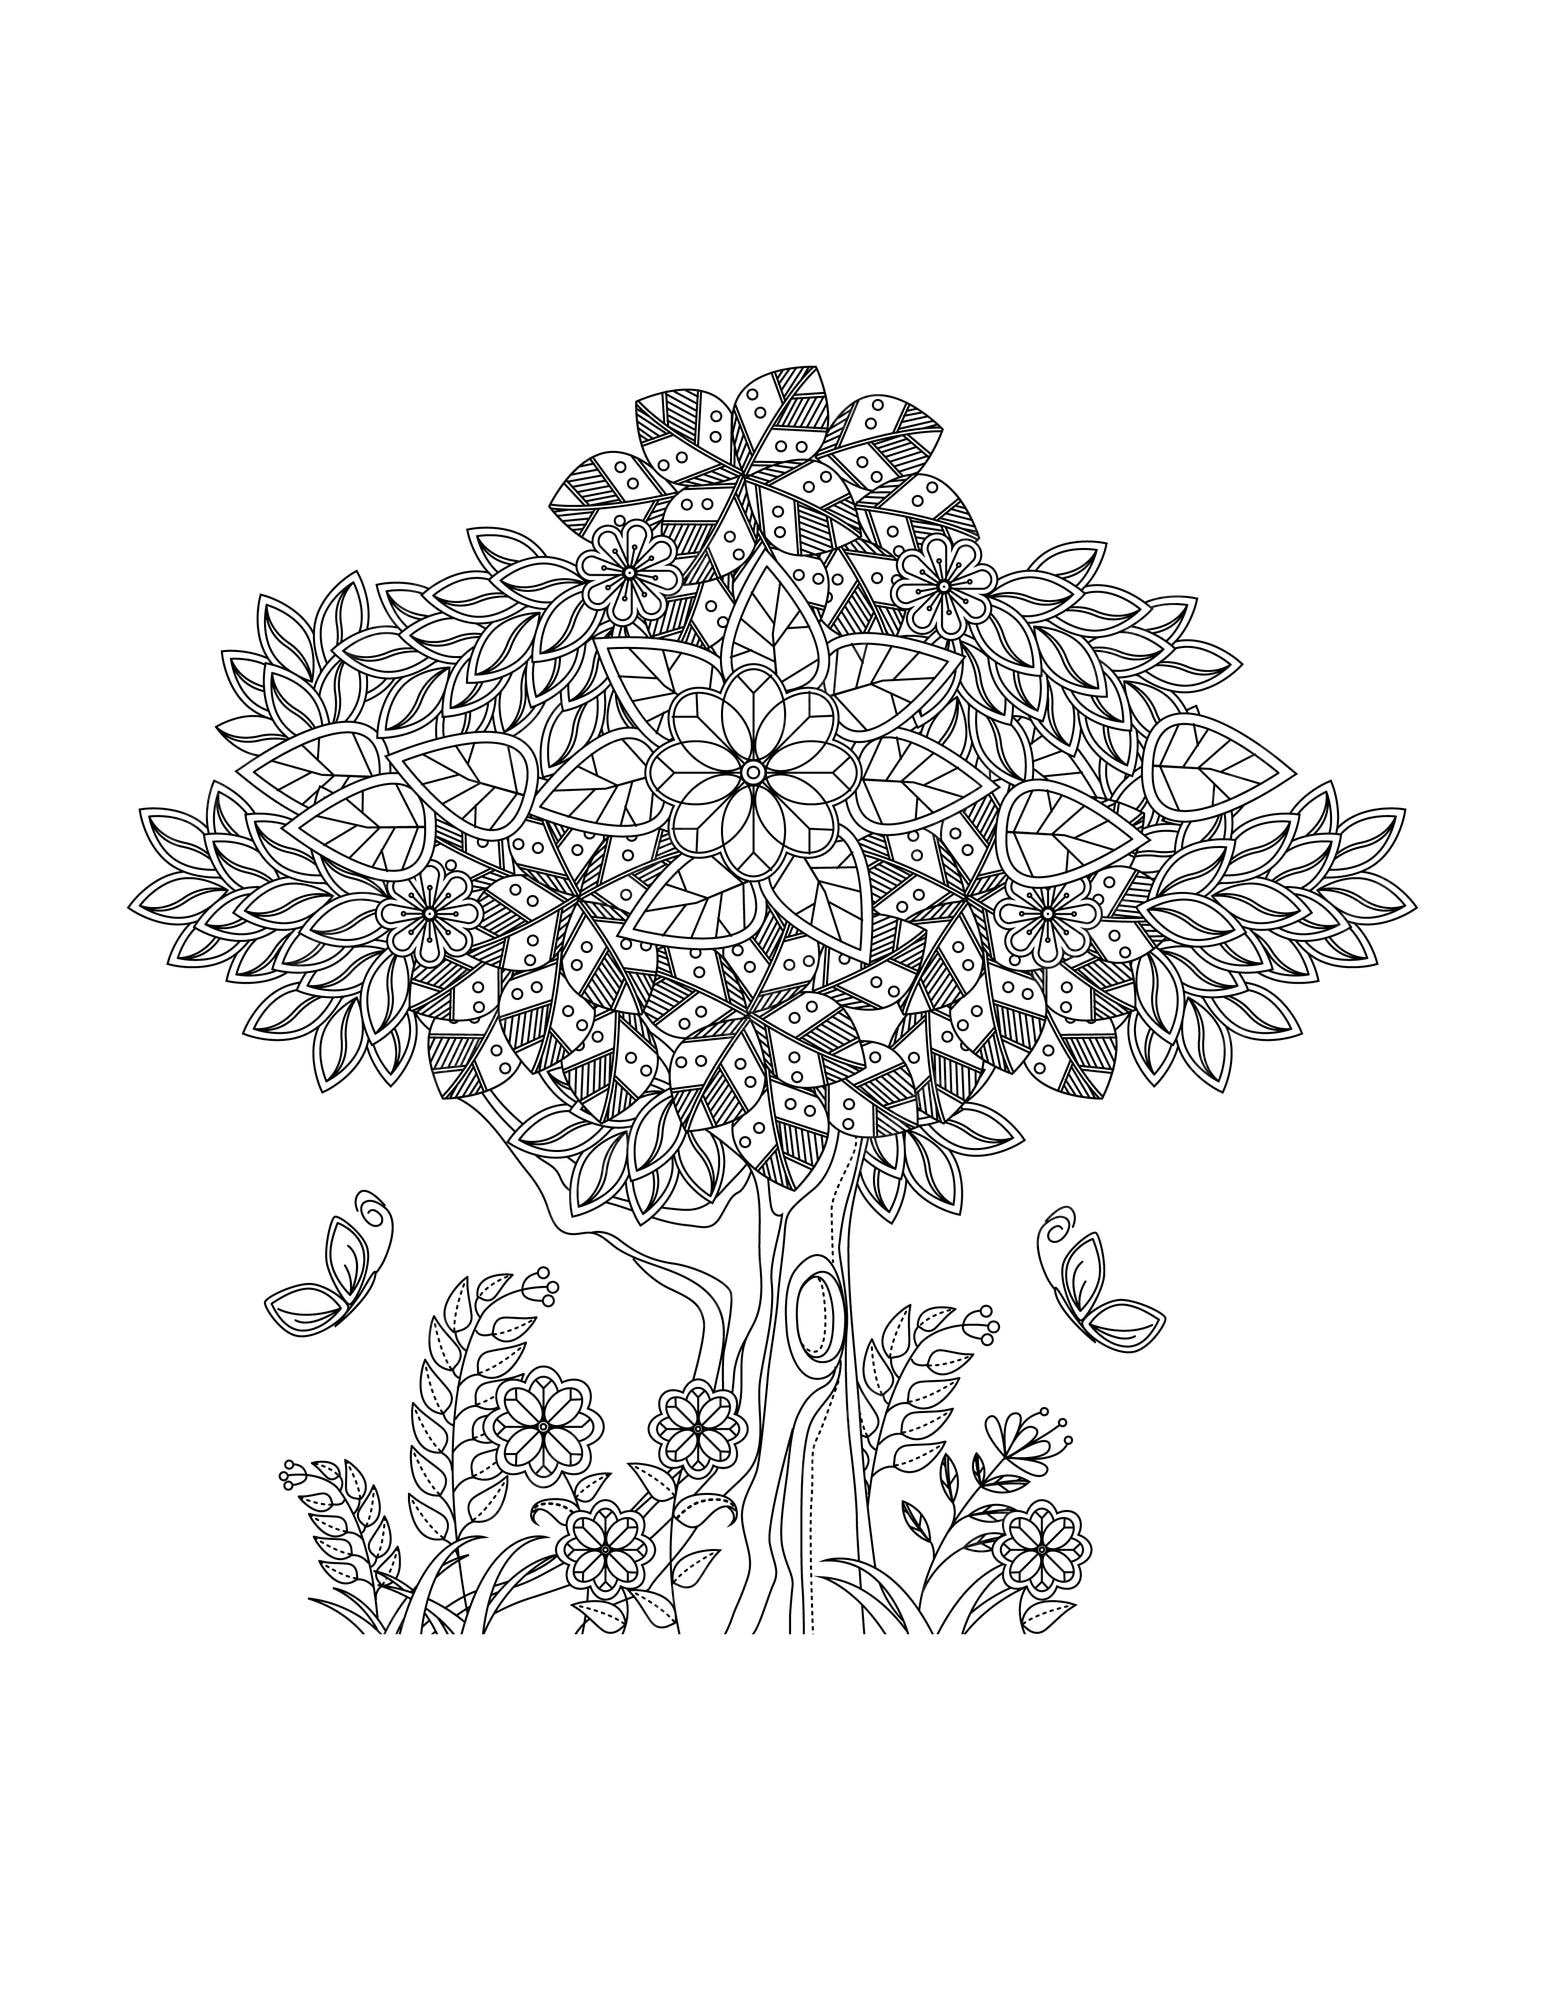 Premium vector tree in a flower leaves zentangle arts for kids and adult coloring page and coloring book